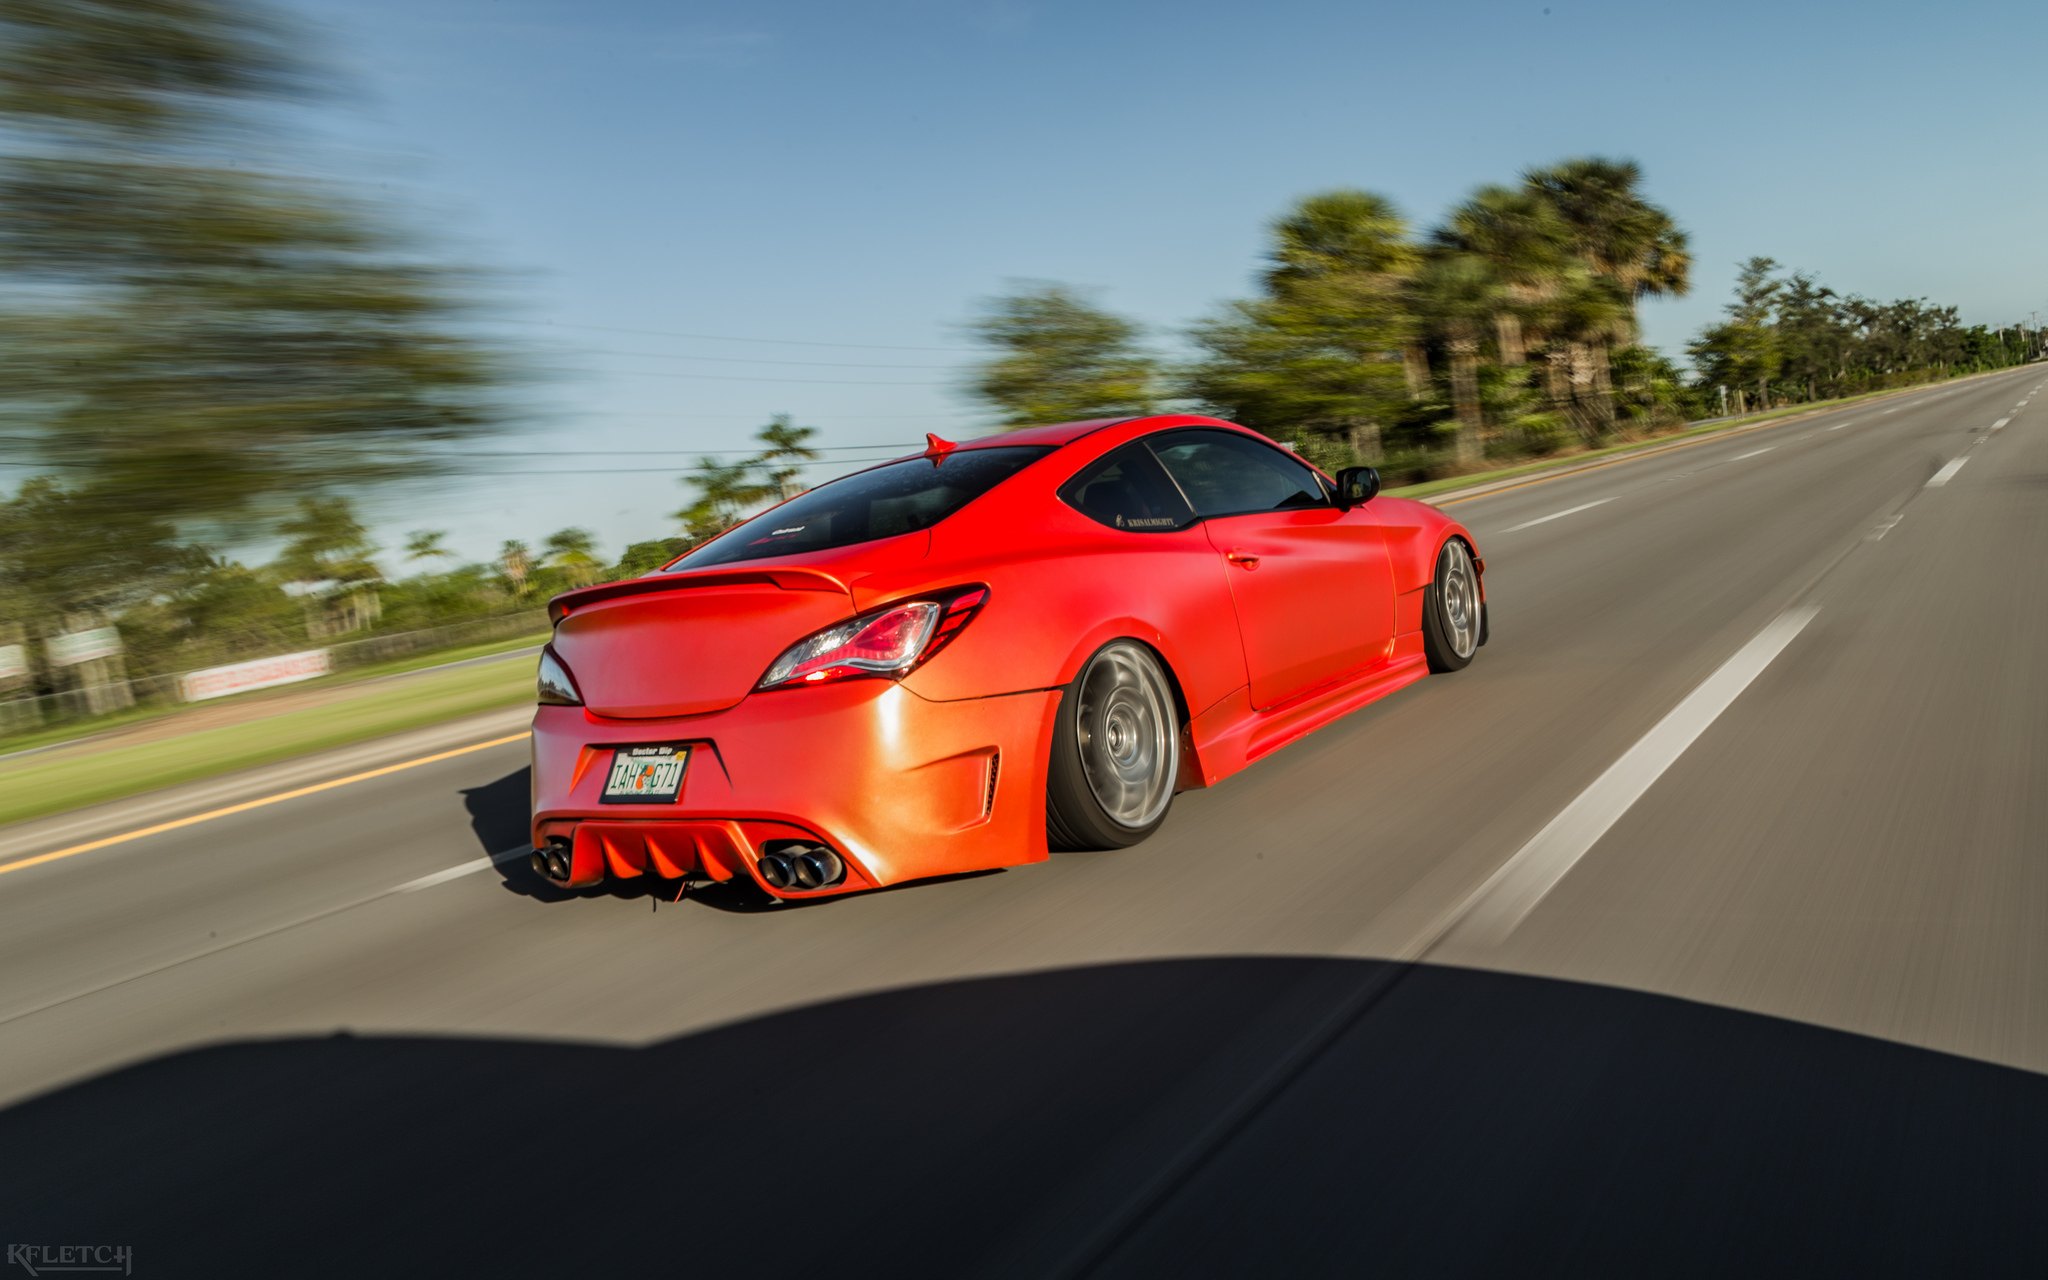 Aftermarket Exhaust System on Red Hyundai Genesis Coupe - Photo by kyle Fletcher